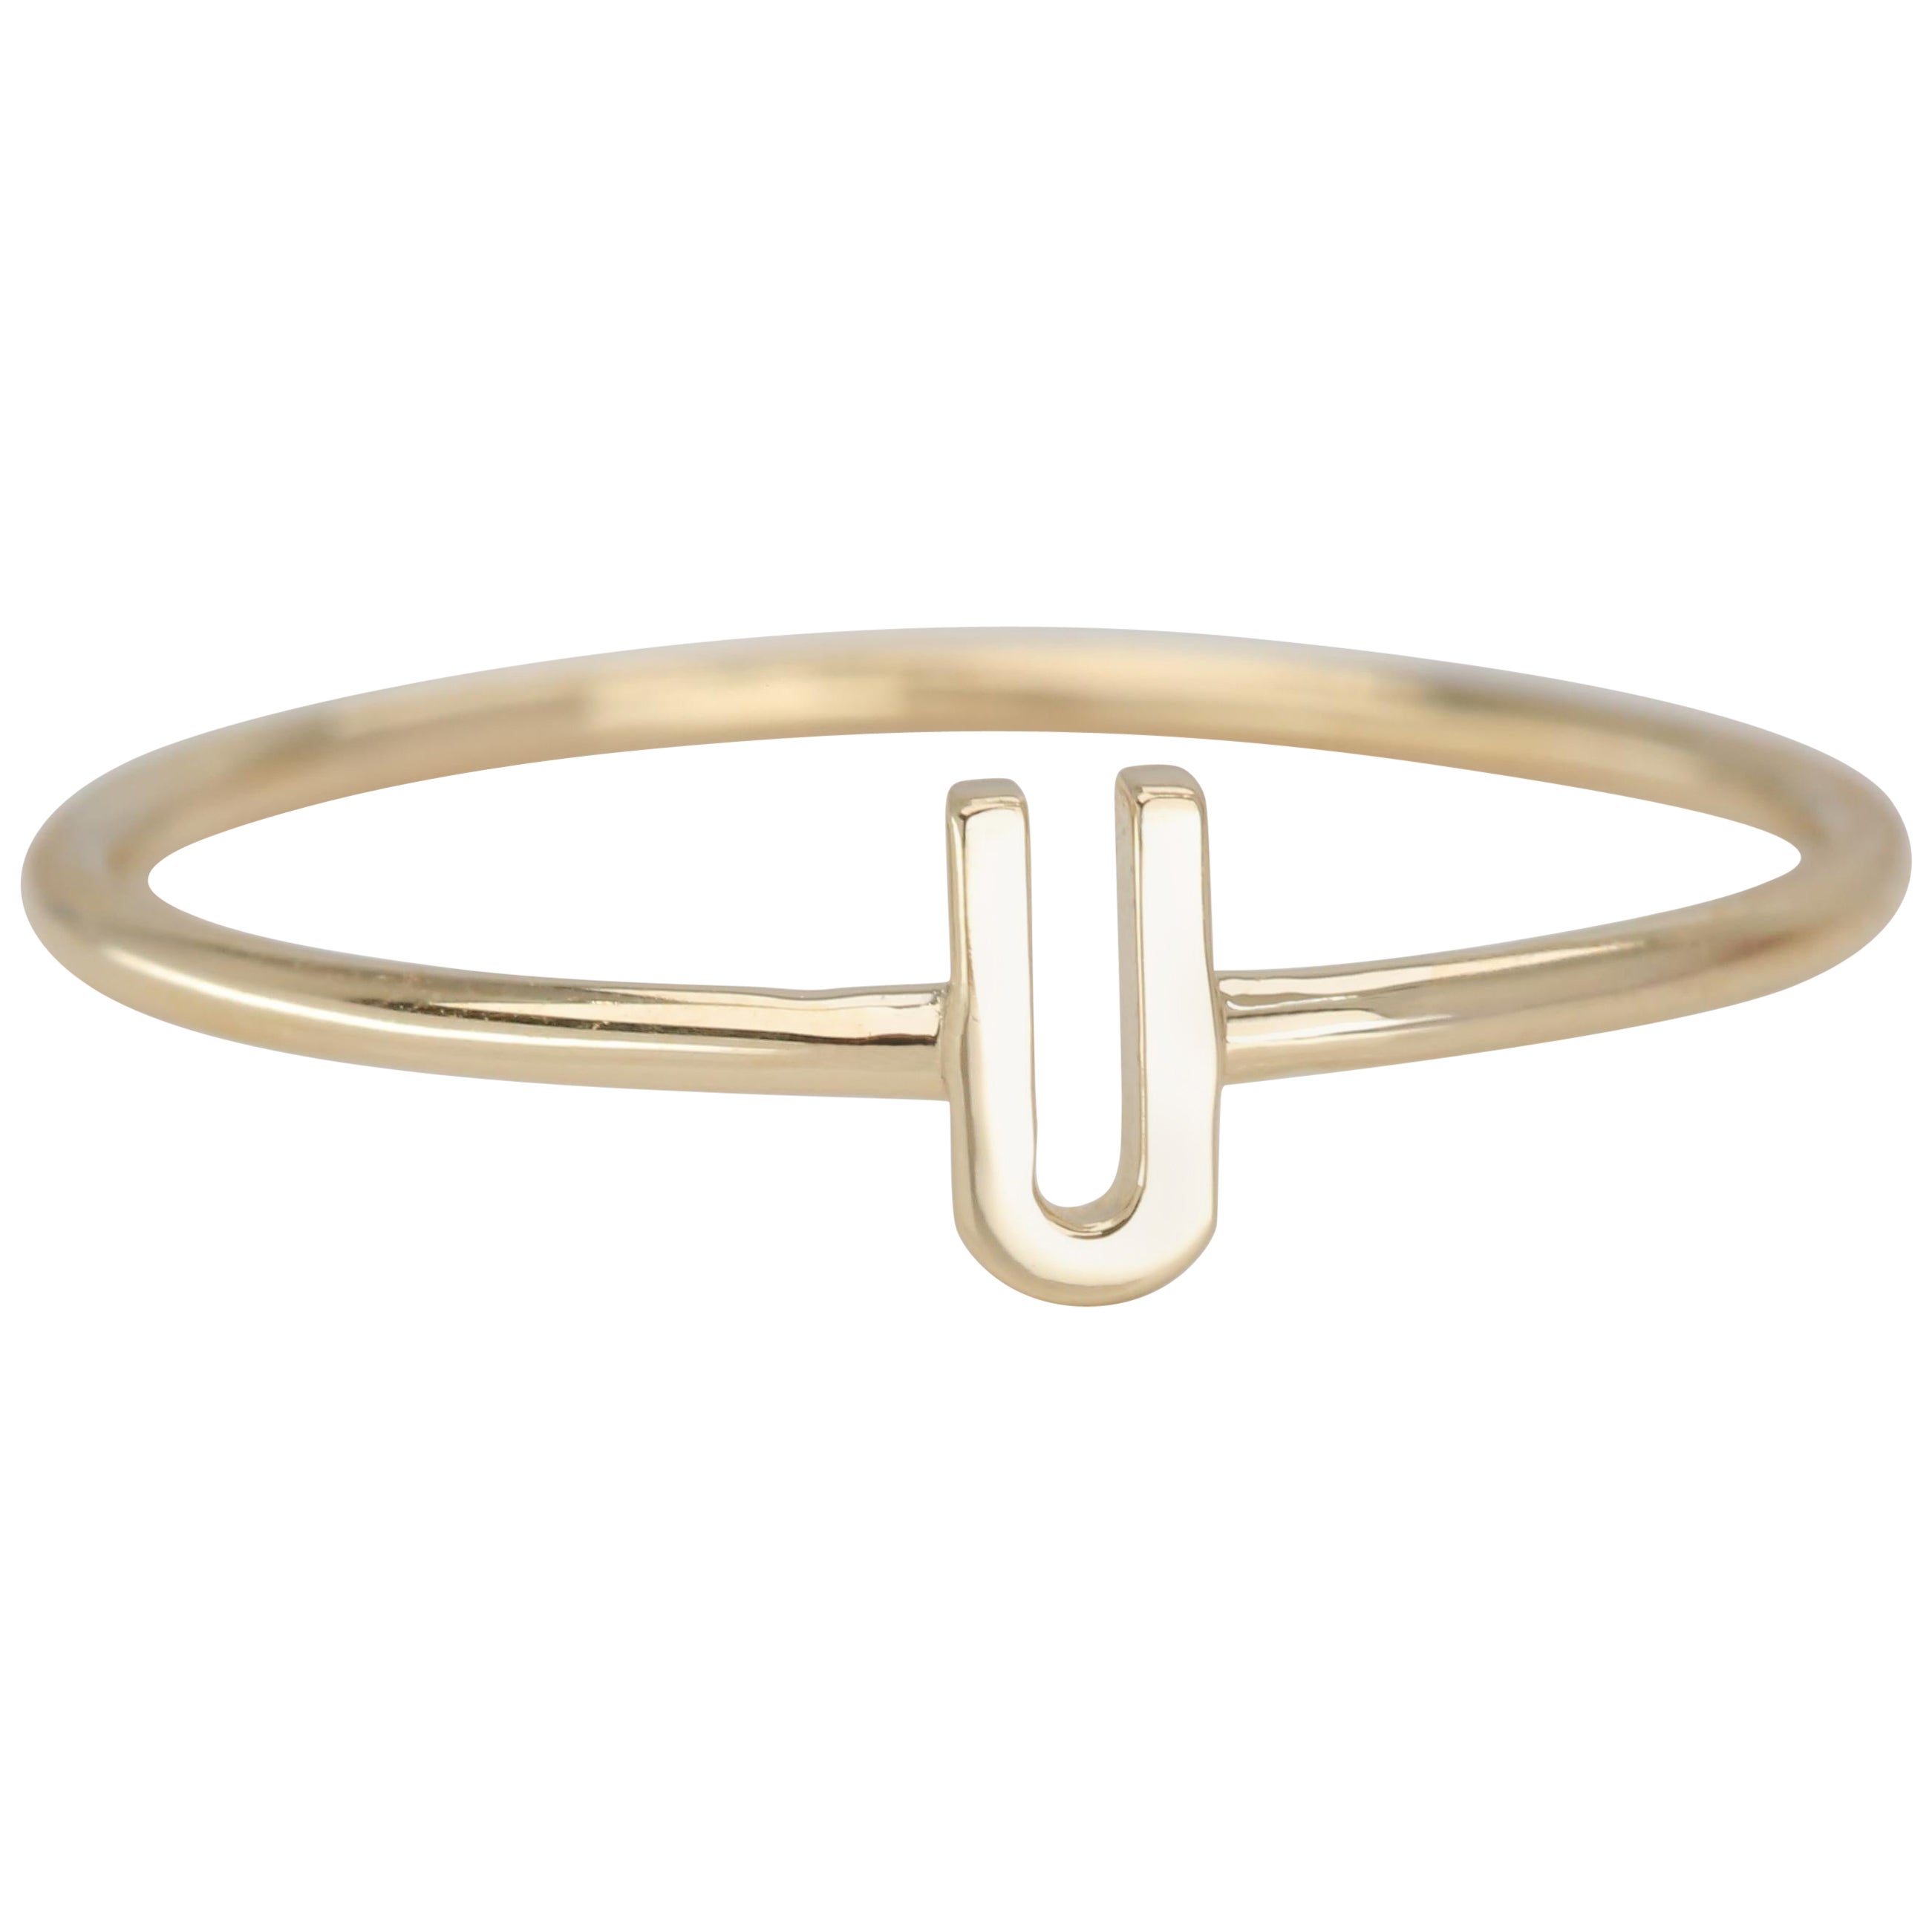 14K Gold Initial U Letter Ring, Personalized Initial Letter Ring